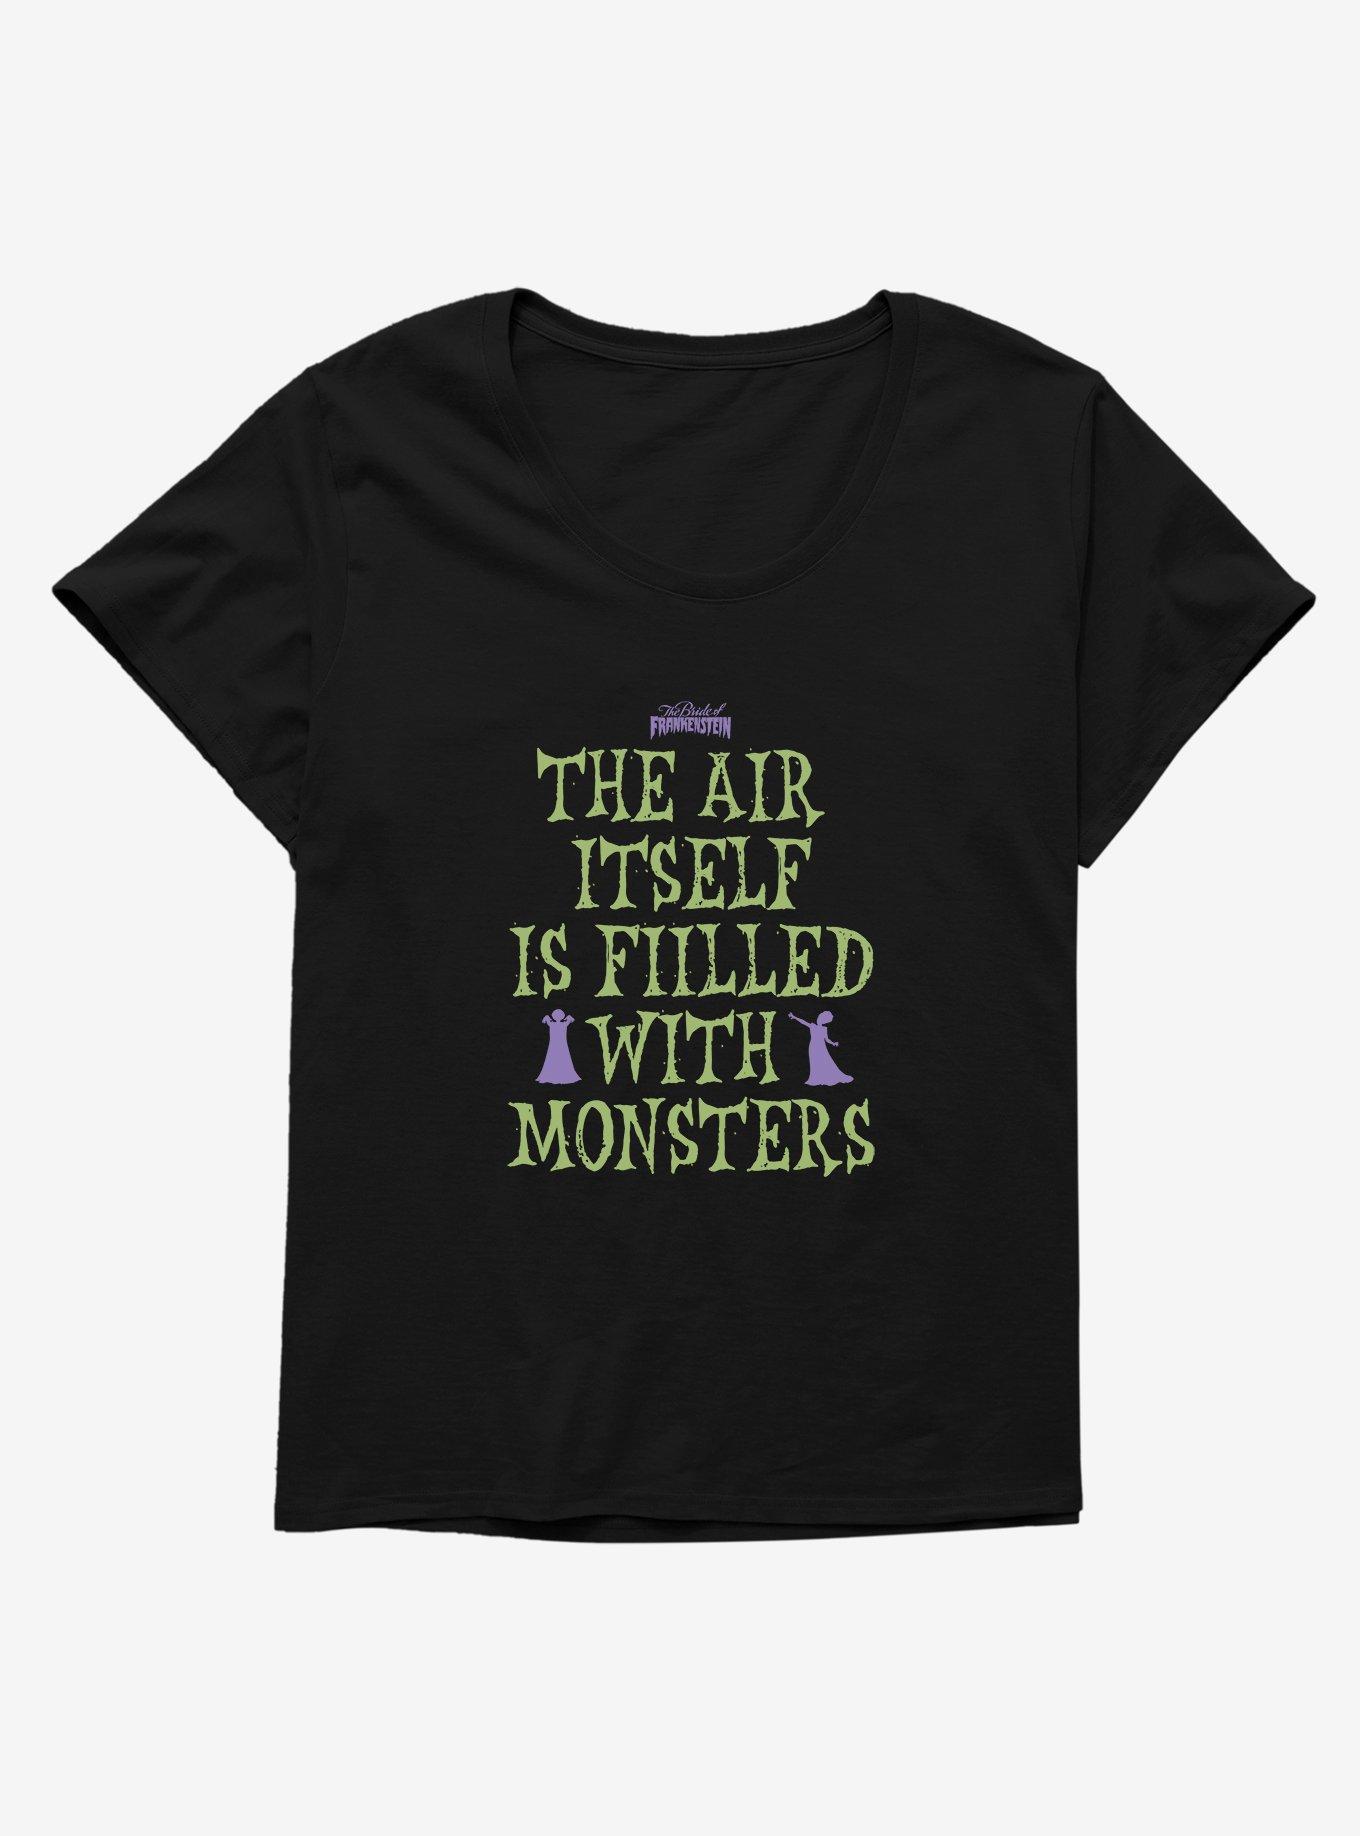 Bride Of Frankenstein Air Filled With Monsters Girls T-Shirt Plus Size, BLACK, hi-res